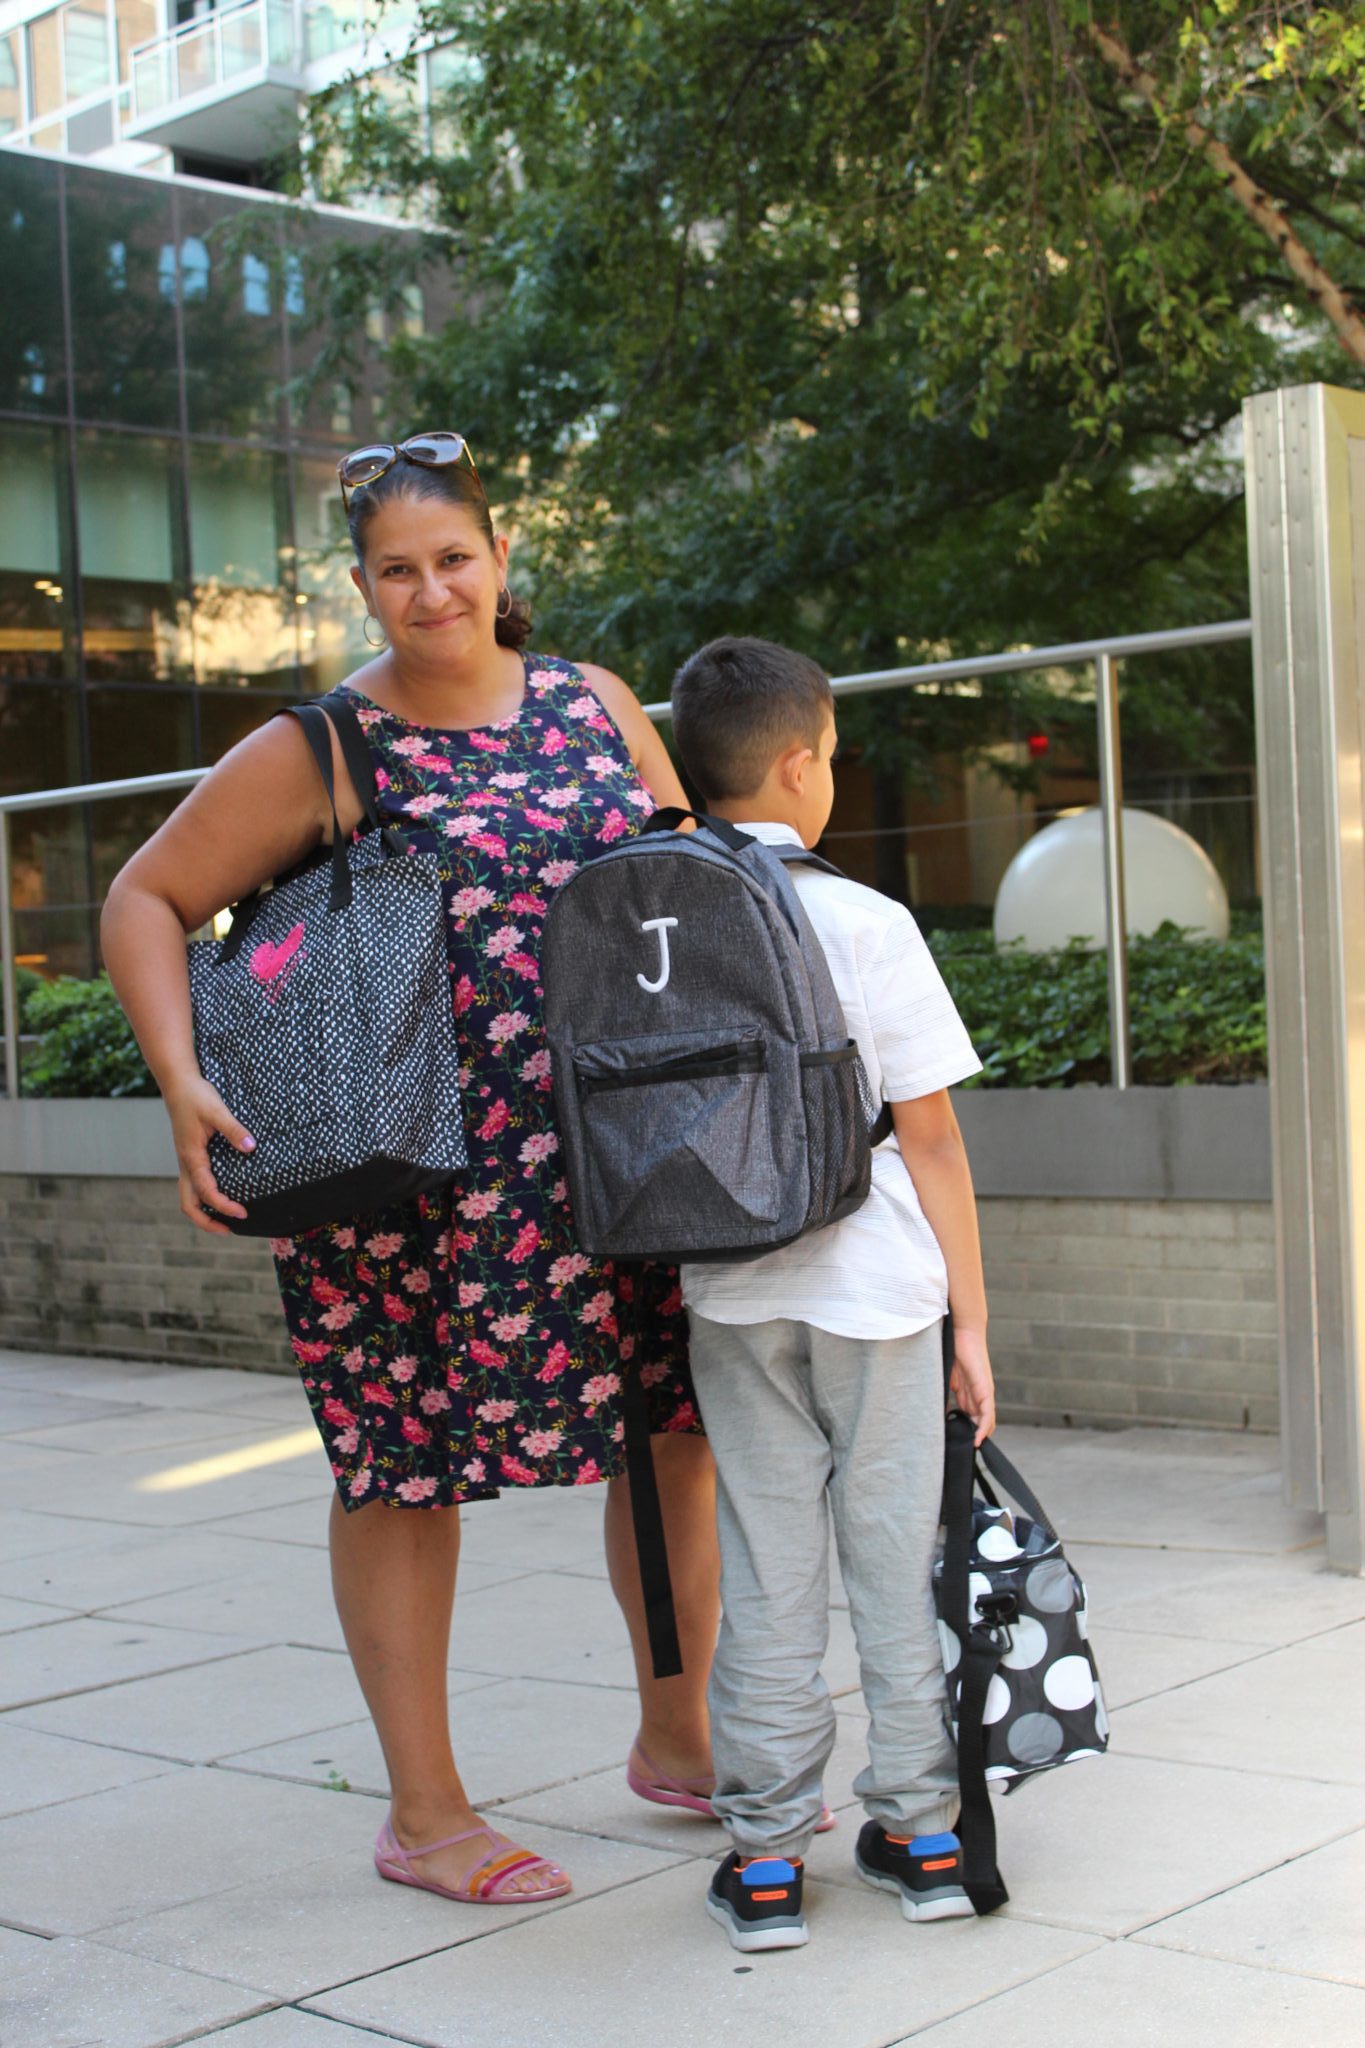 It's back to school time! This year we're ready with Thirty-One. Check out the great backpacks, totes, and lunch boxes we chose -- for kids and teachers too!